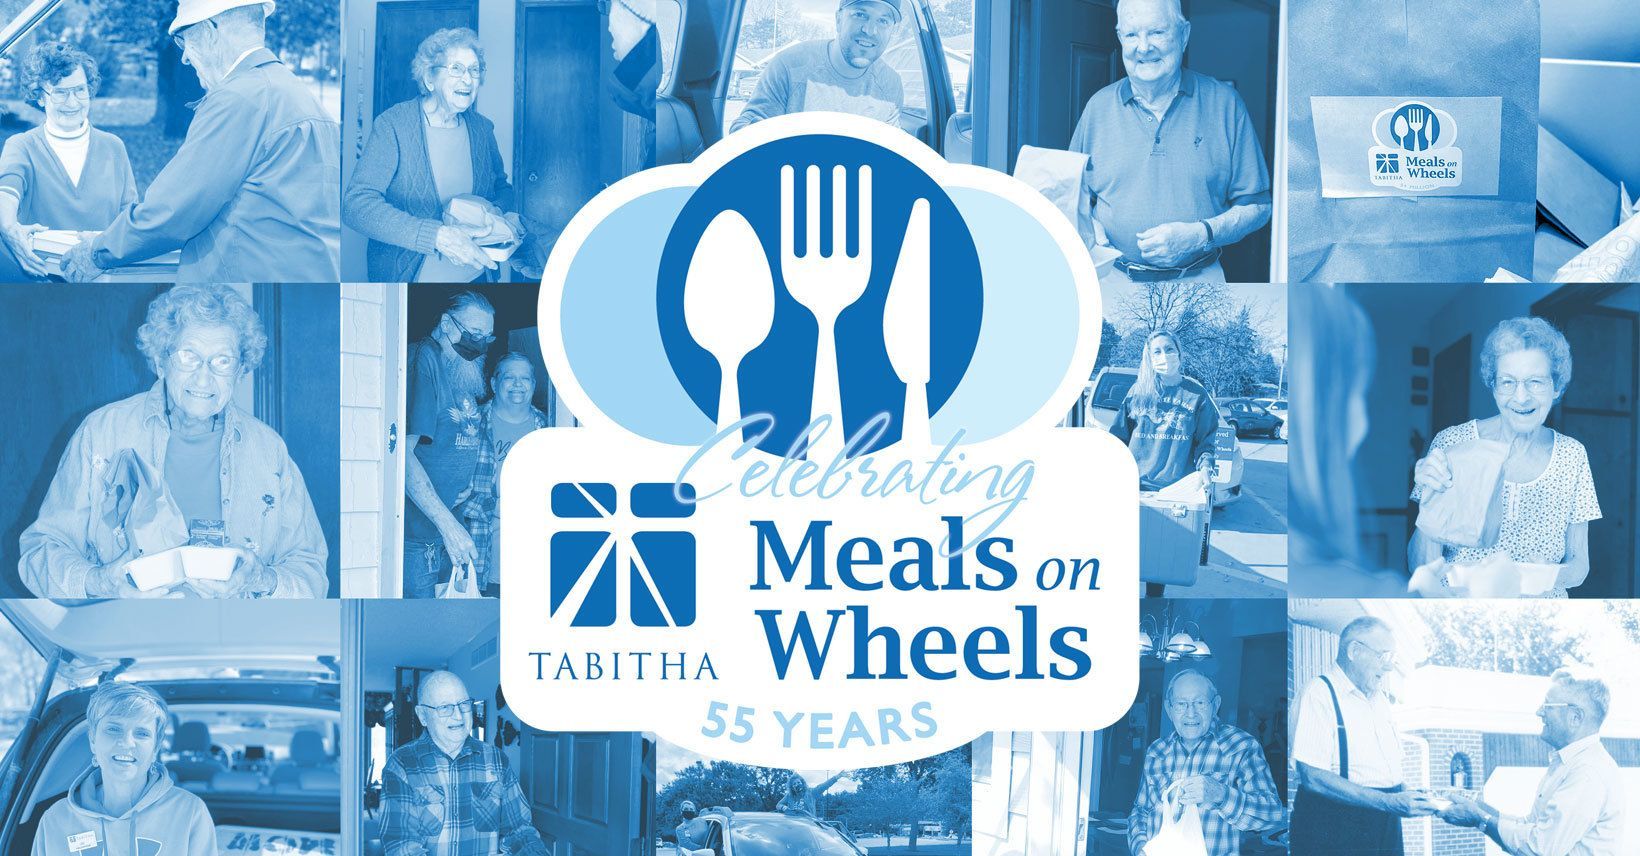 Tabitha Meals on Wheels Celebrates its 55th Year with a March for Meals